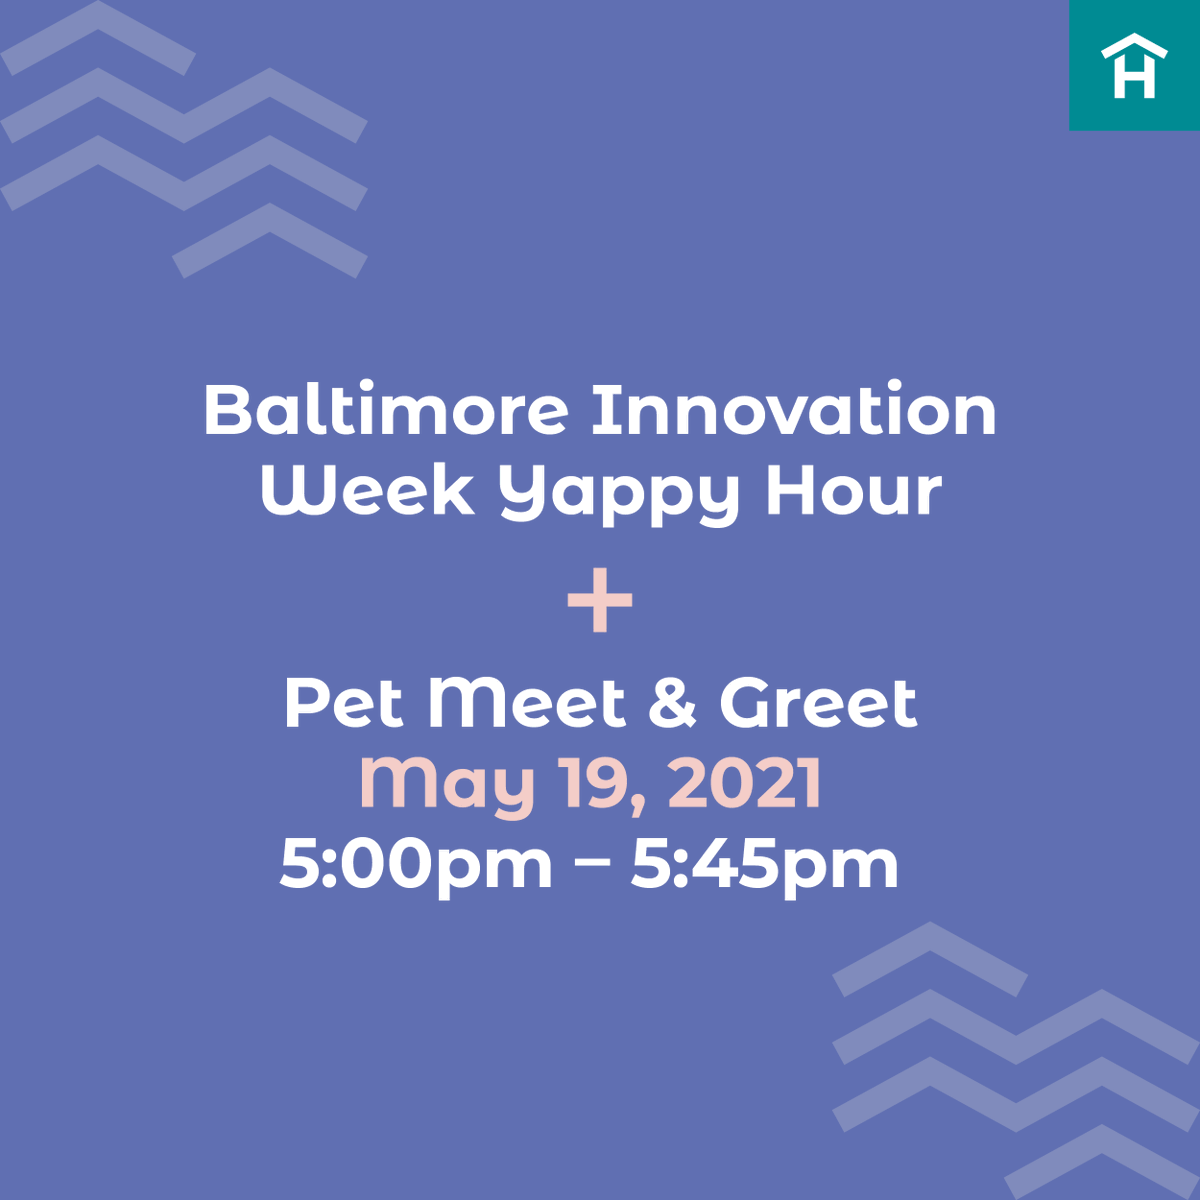 What's better than a #HappyHour? A Yappy Hour🐾 

Grab your pet & join our Hutch Program Manager Stephanie Chin at #BIW21, alongside @NoOrdnryCherry of @sparkbmore & Deborah Tillett of @etcbaltimore for a #YappyHour Pet Meet & Greet on 5/19 at 5PM EST. bit.ly/2R23QNq